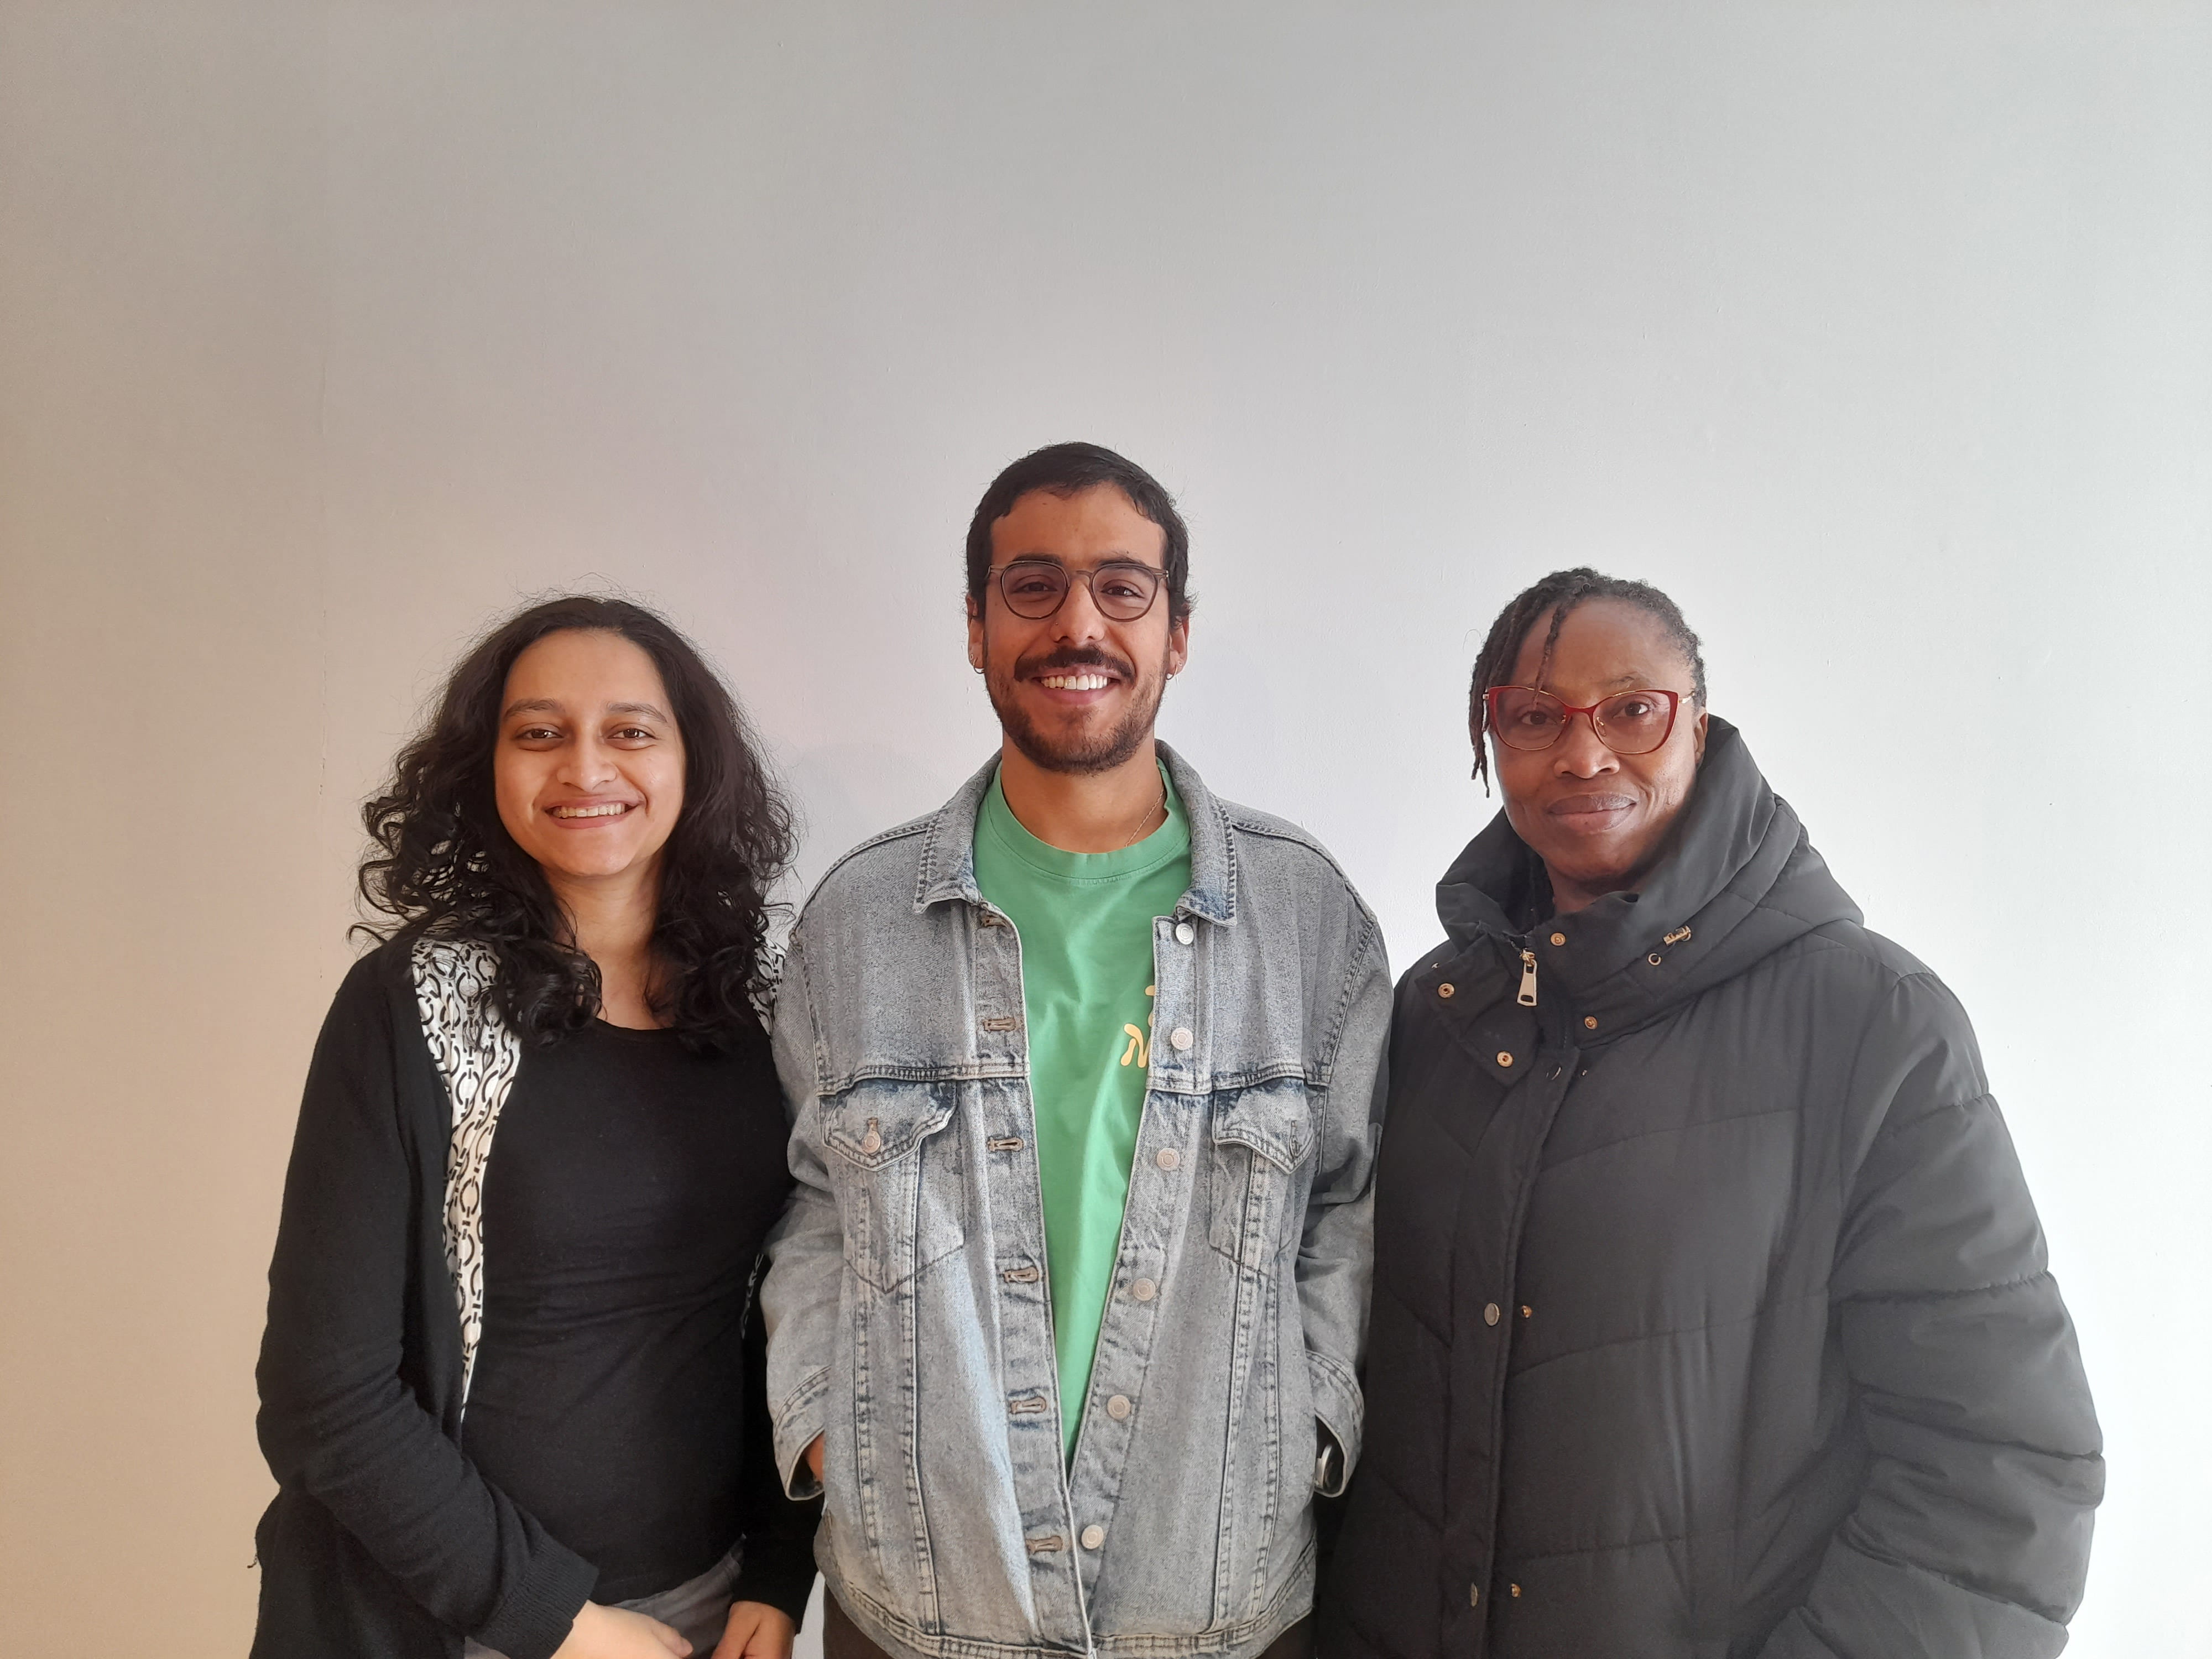 Three of the MA Curating students from the School of Philosophy and Art History who are curating the Art Exchange exhibition Lucid Borders from 27 April to 2 June 2023.